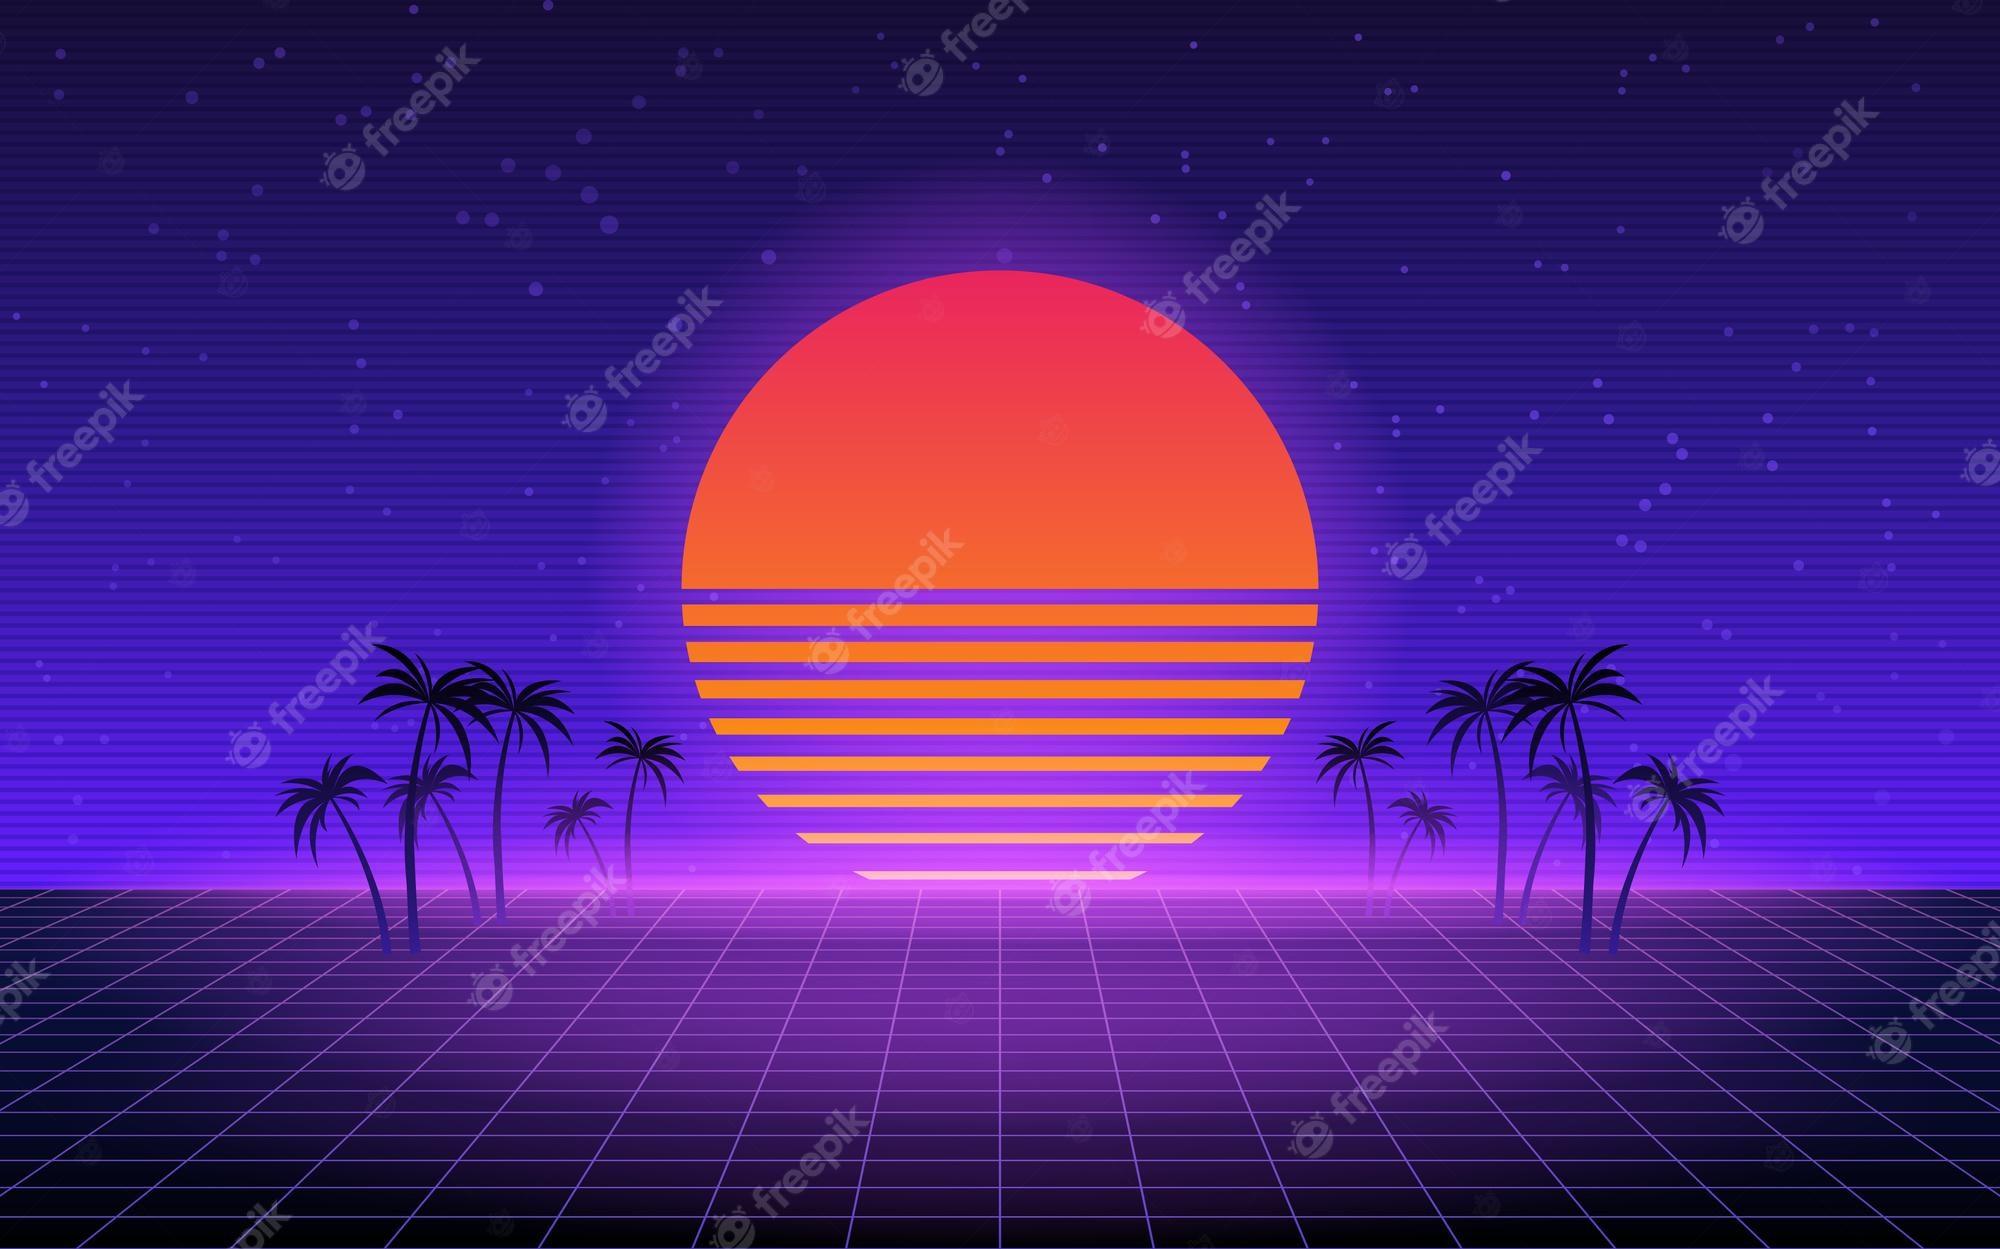 Premium Vector 80s style retro background with sun and